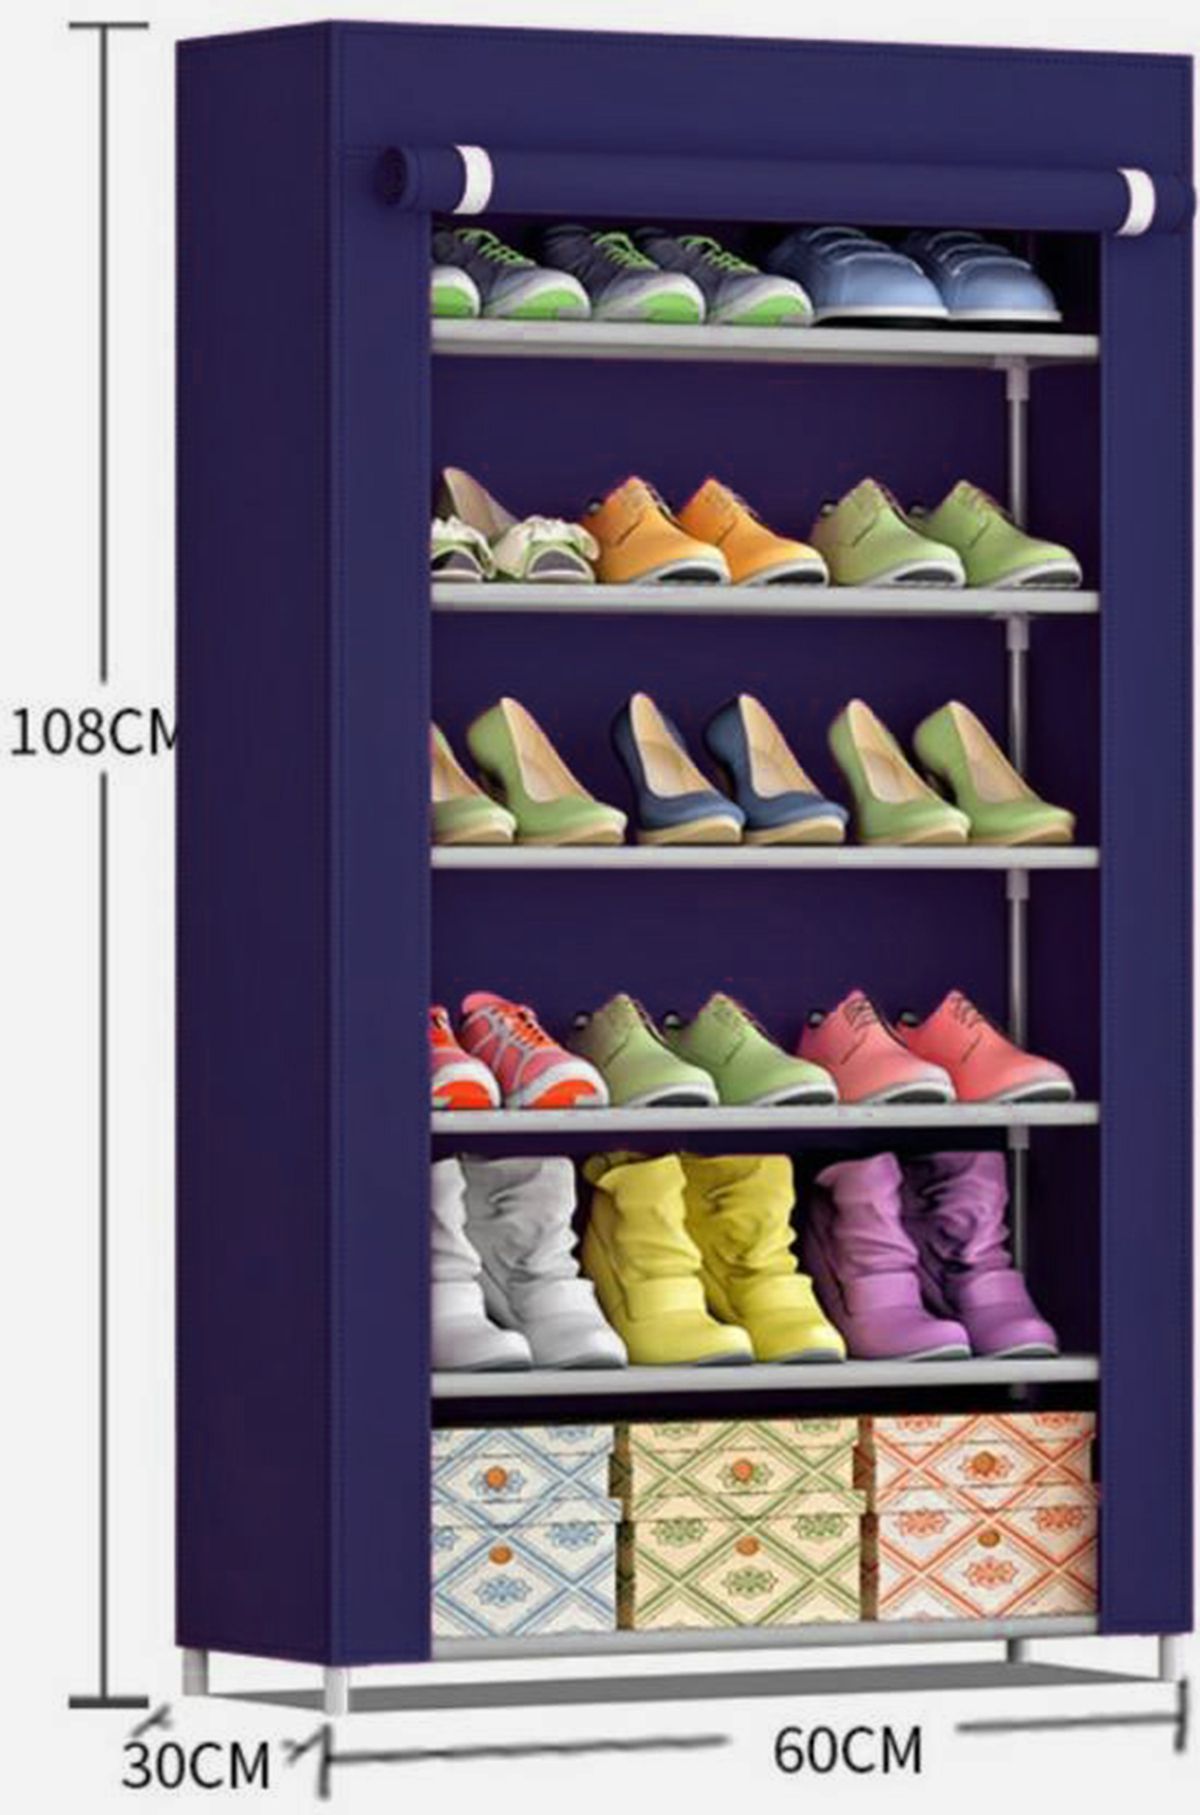 shoe Rack - Buy shoe Rack Online at Best Prices in India on Snapdeal